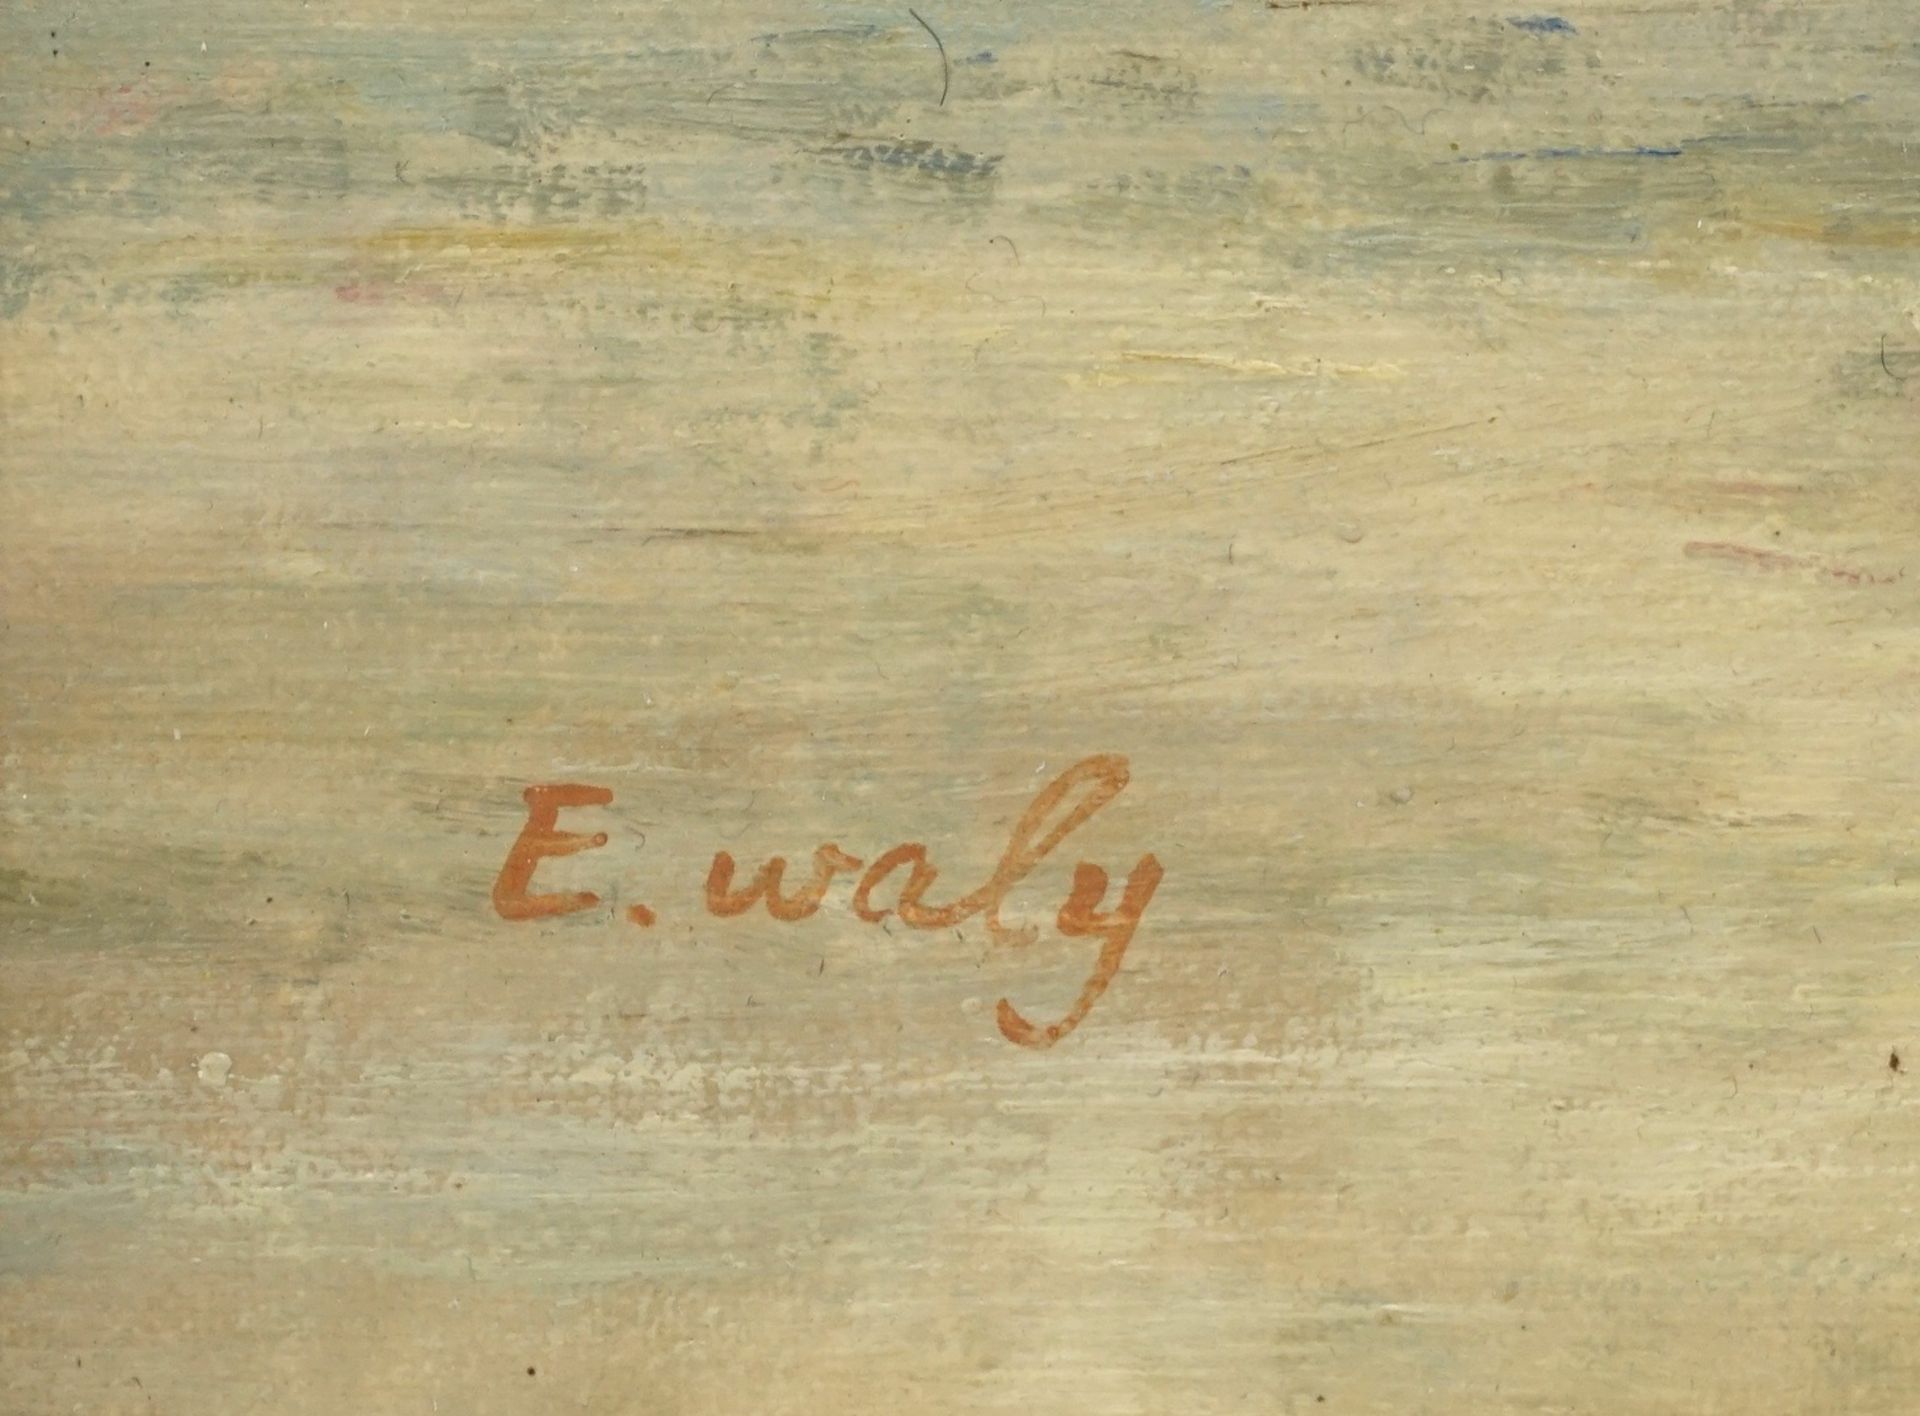 E. Waly, Heuernte am See - Image 4 of 4